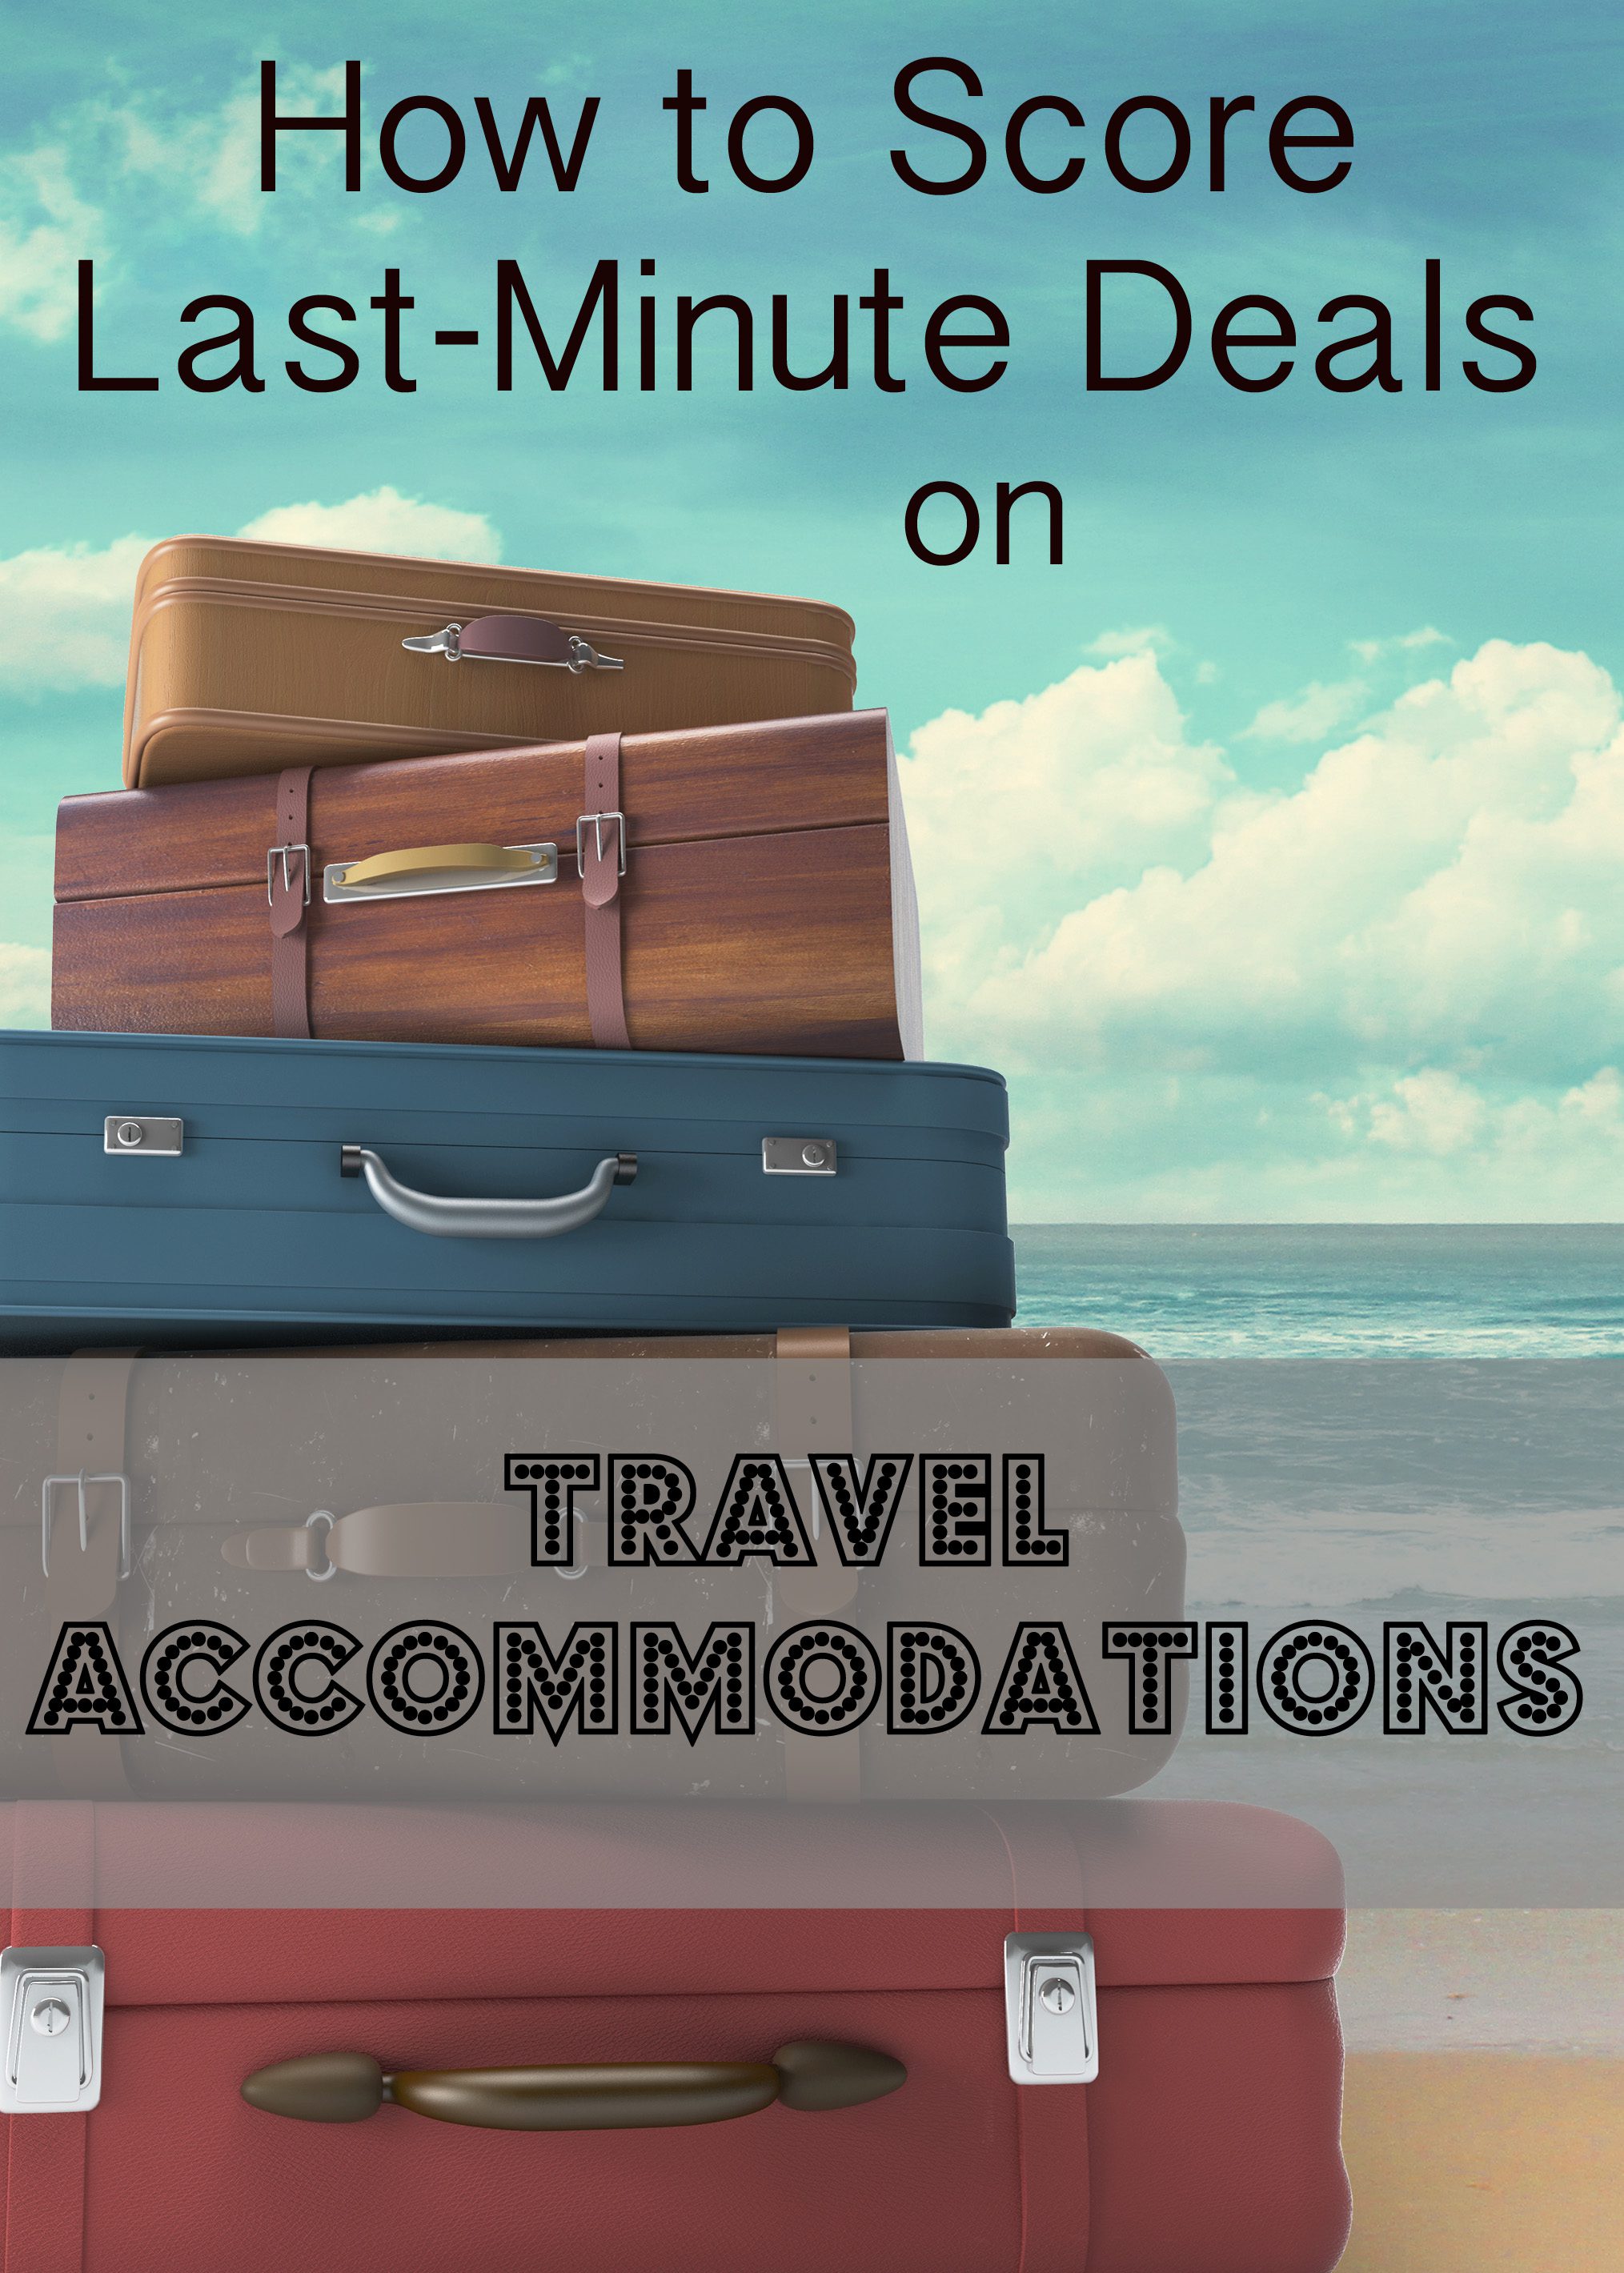 How to Score Last-Minute Deals on Travel Accommodations